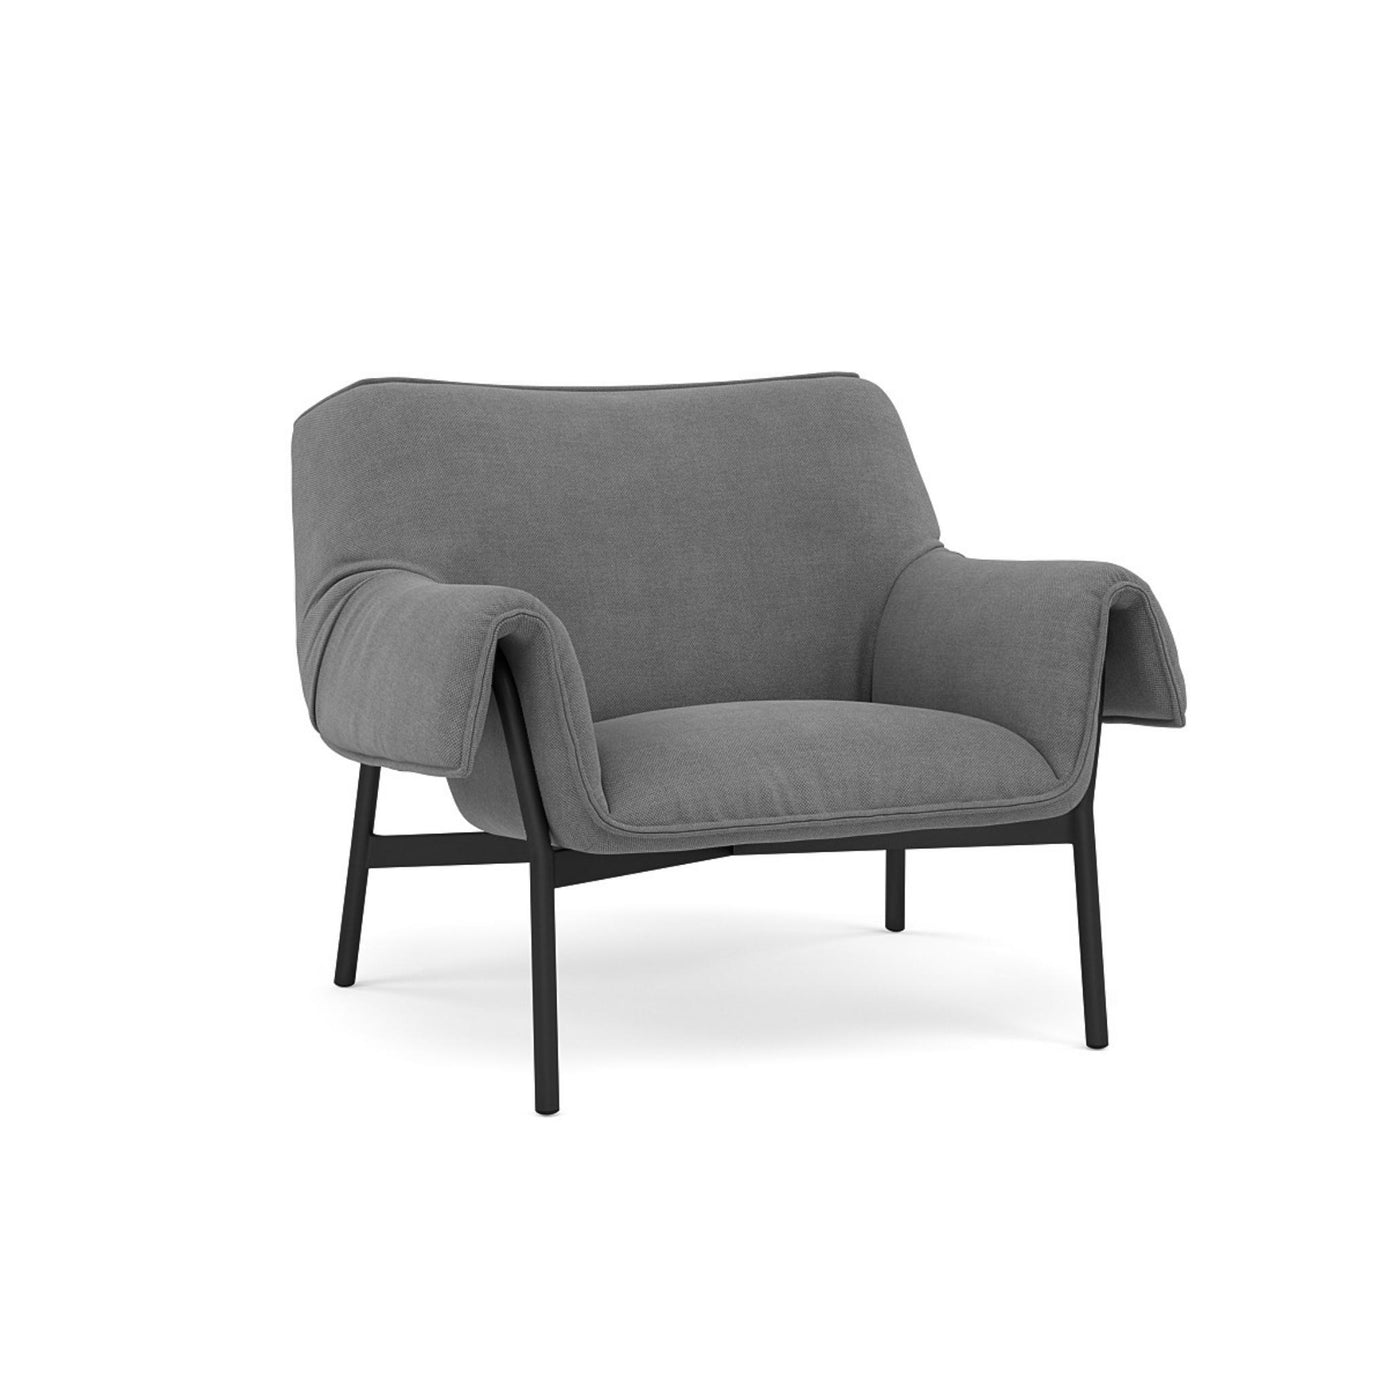 Muuto Wrap Lounge Chair. Made to order from someday designs. #colour_fiord-171